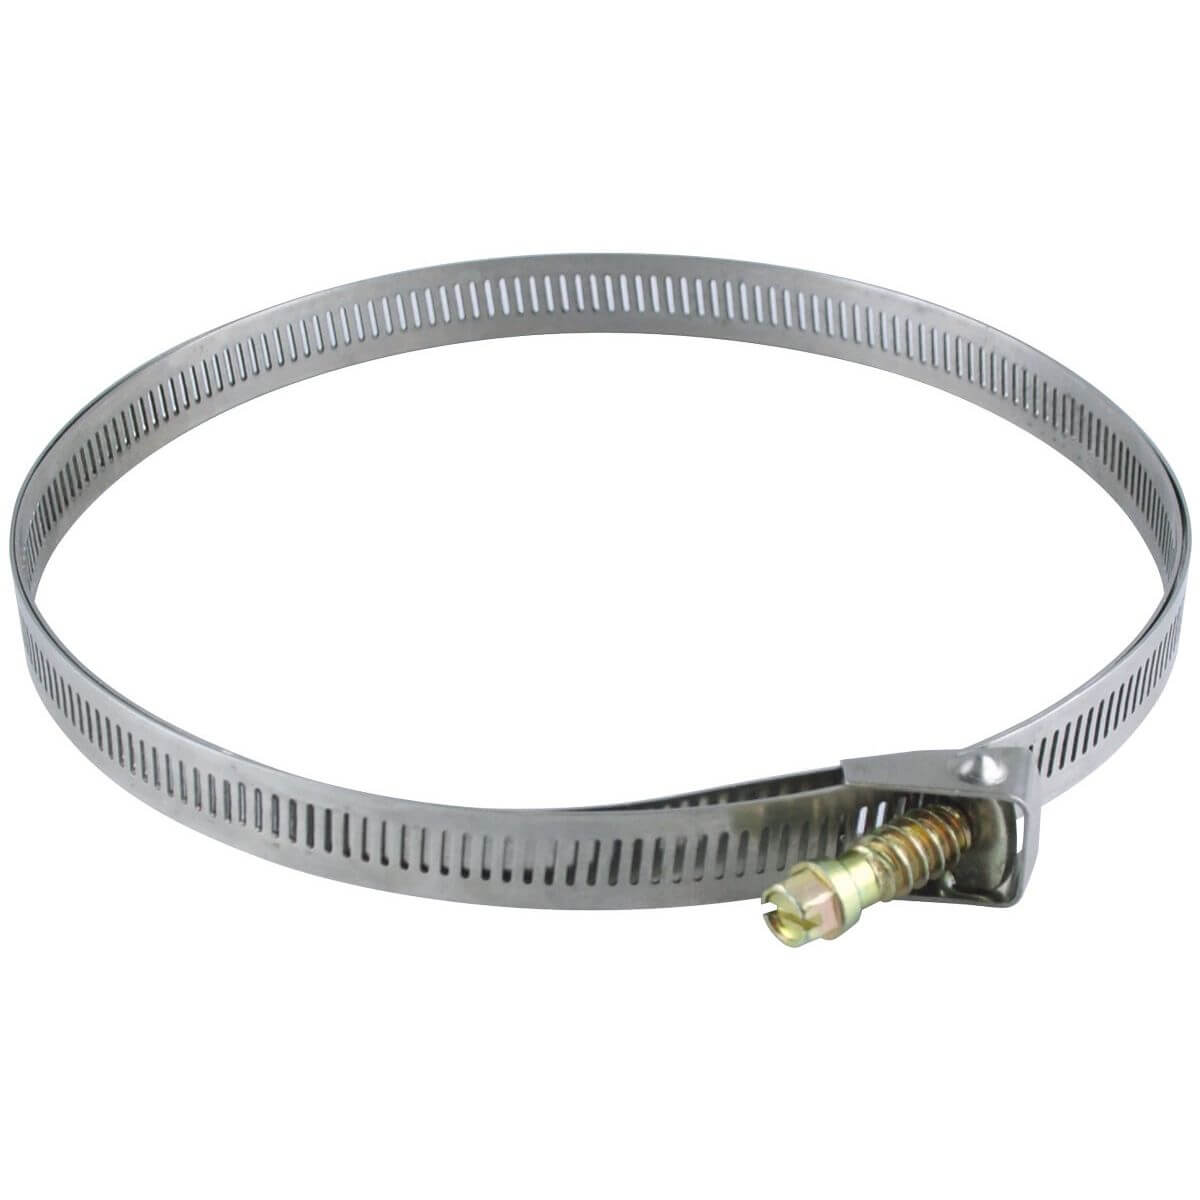 A picture of a stainless steel mounting strap for commercial or residential applications